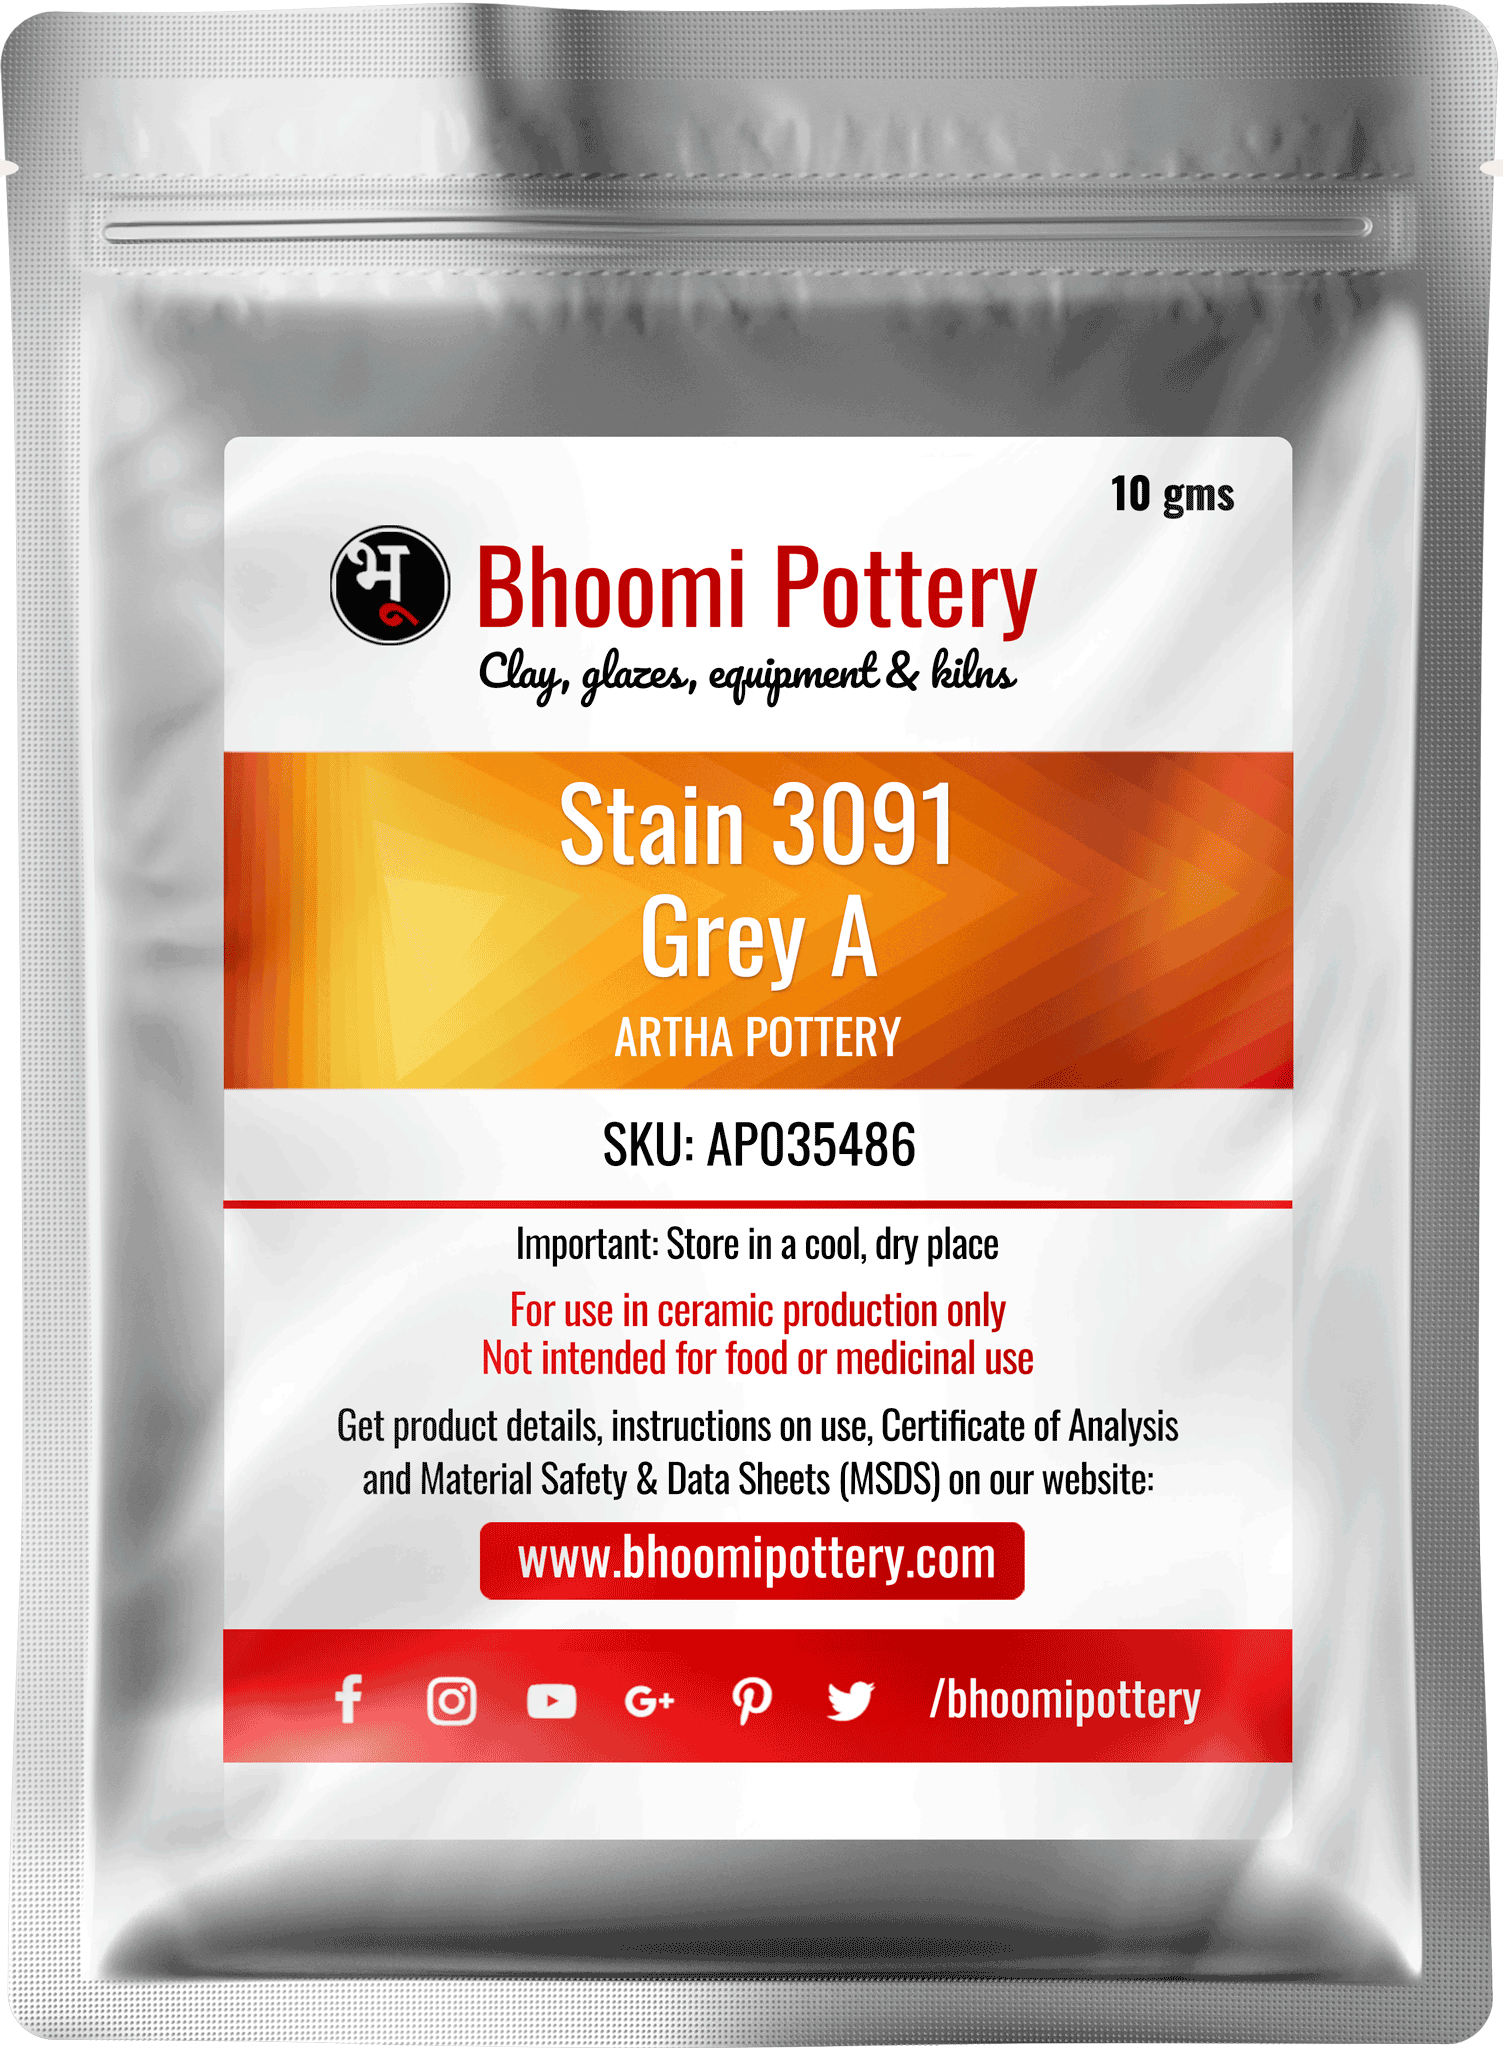 Artha Pottery Stain 3091 Grey A 100 gms for sale in India - Bhoomi Pottery